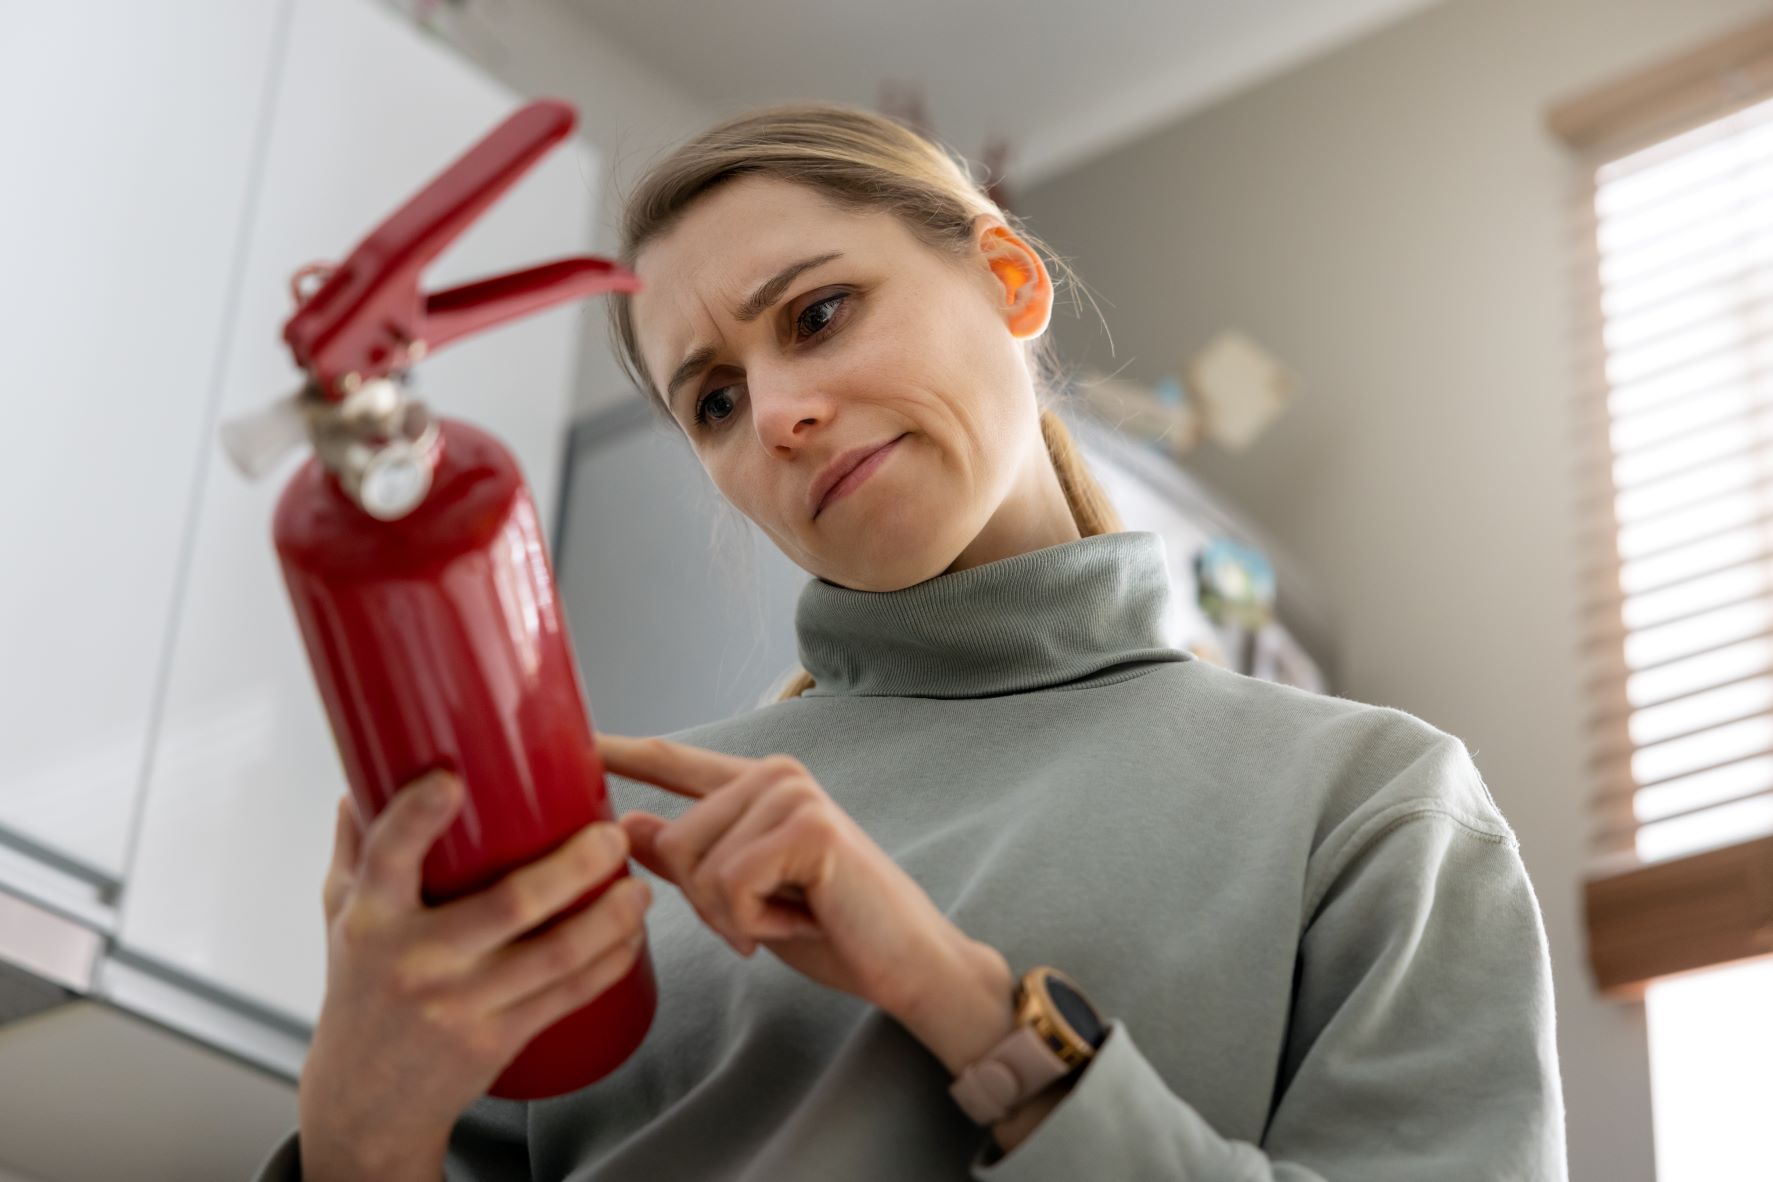 Do you have a fire extinguisher and know how to use it?